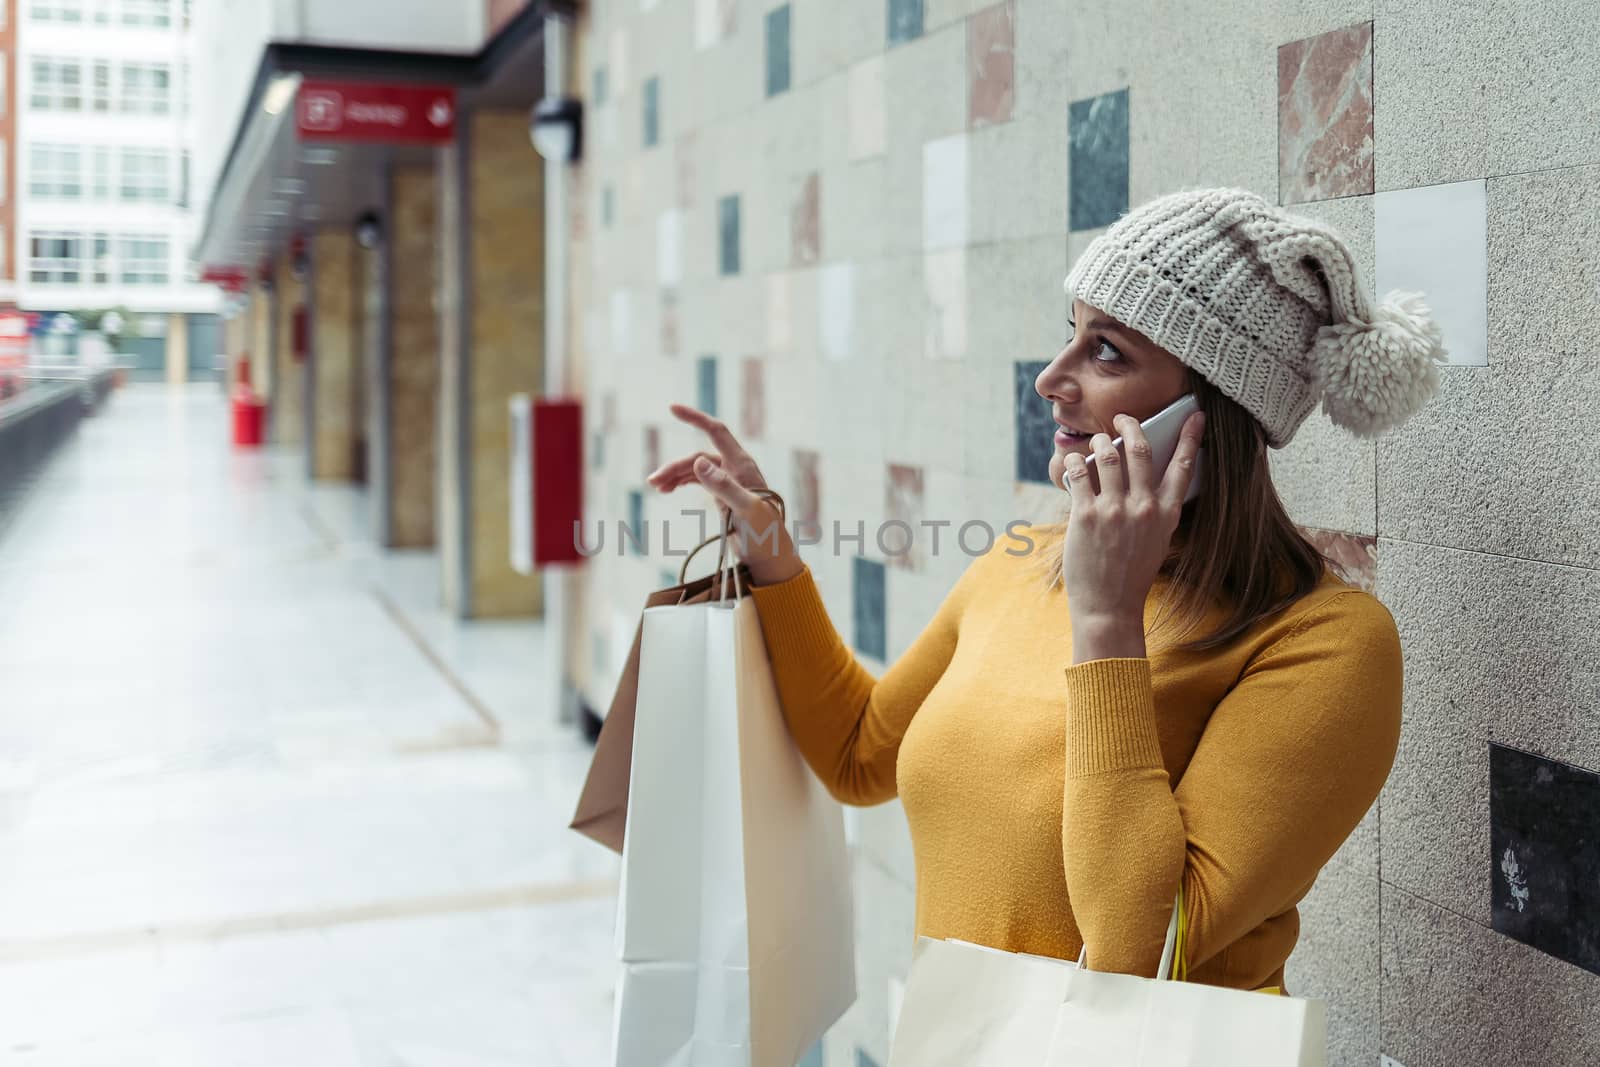 Woman wearing a yellow sweater and wool cap talking on her mobile phone while holding shopping bags. by JRPazos